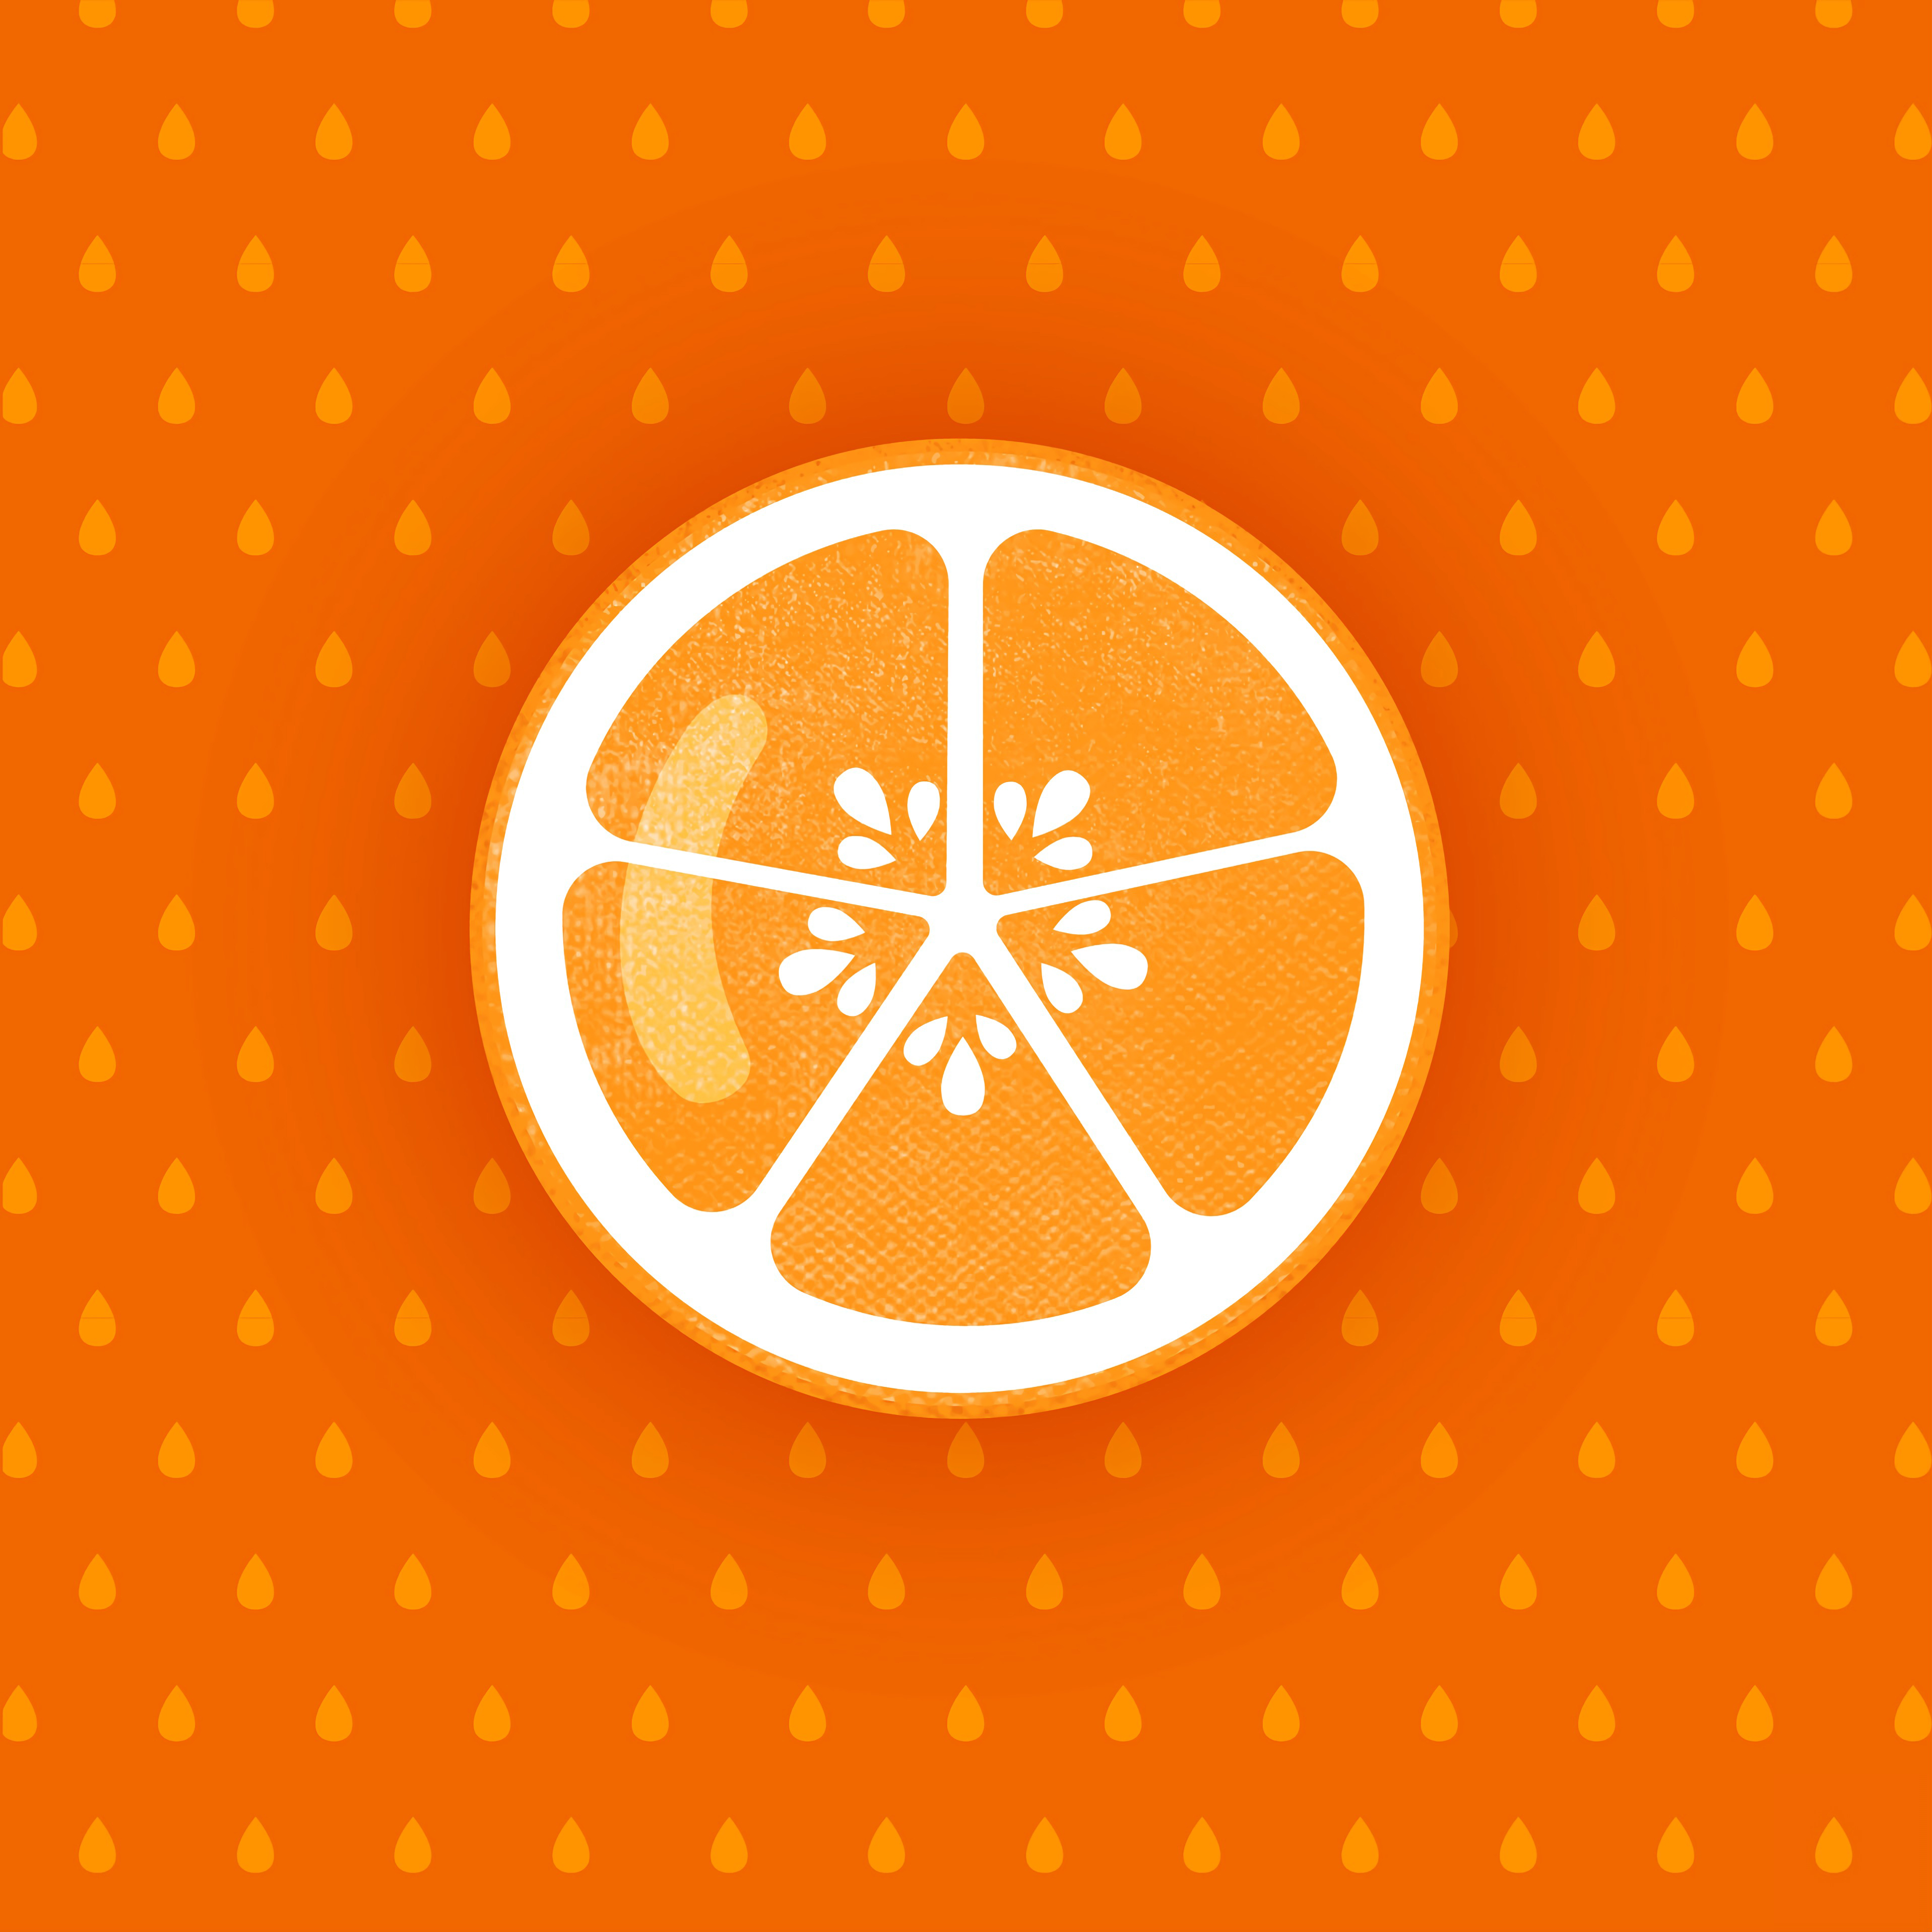 73319 free download Orange wallpapers for phone, fruit, citrus, vector, art Orange images and screensavers for mobile